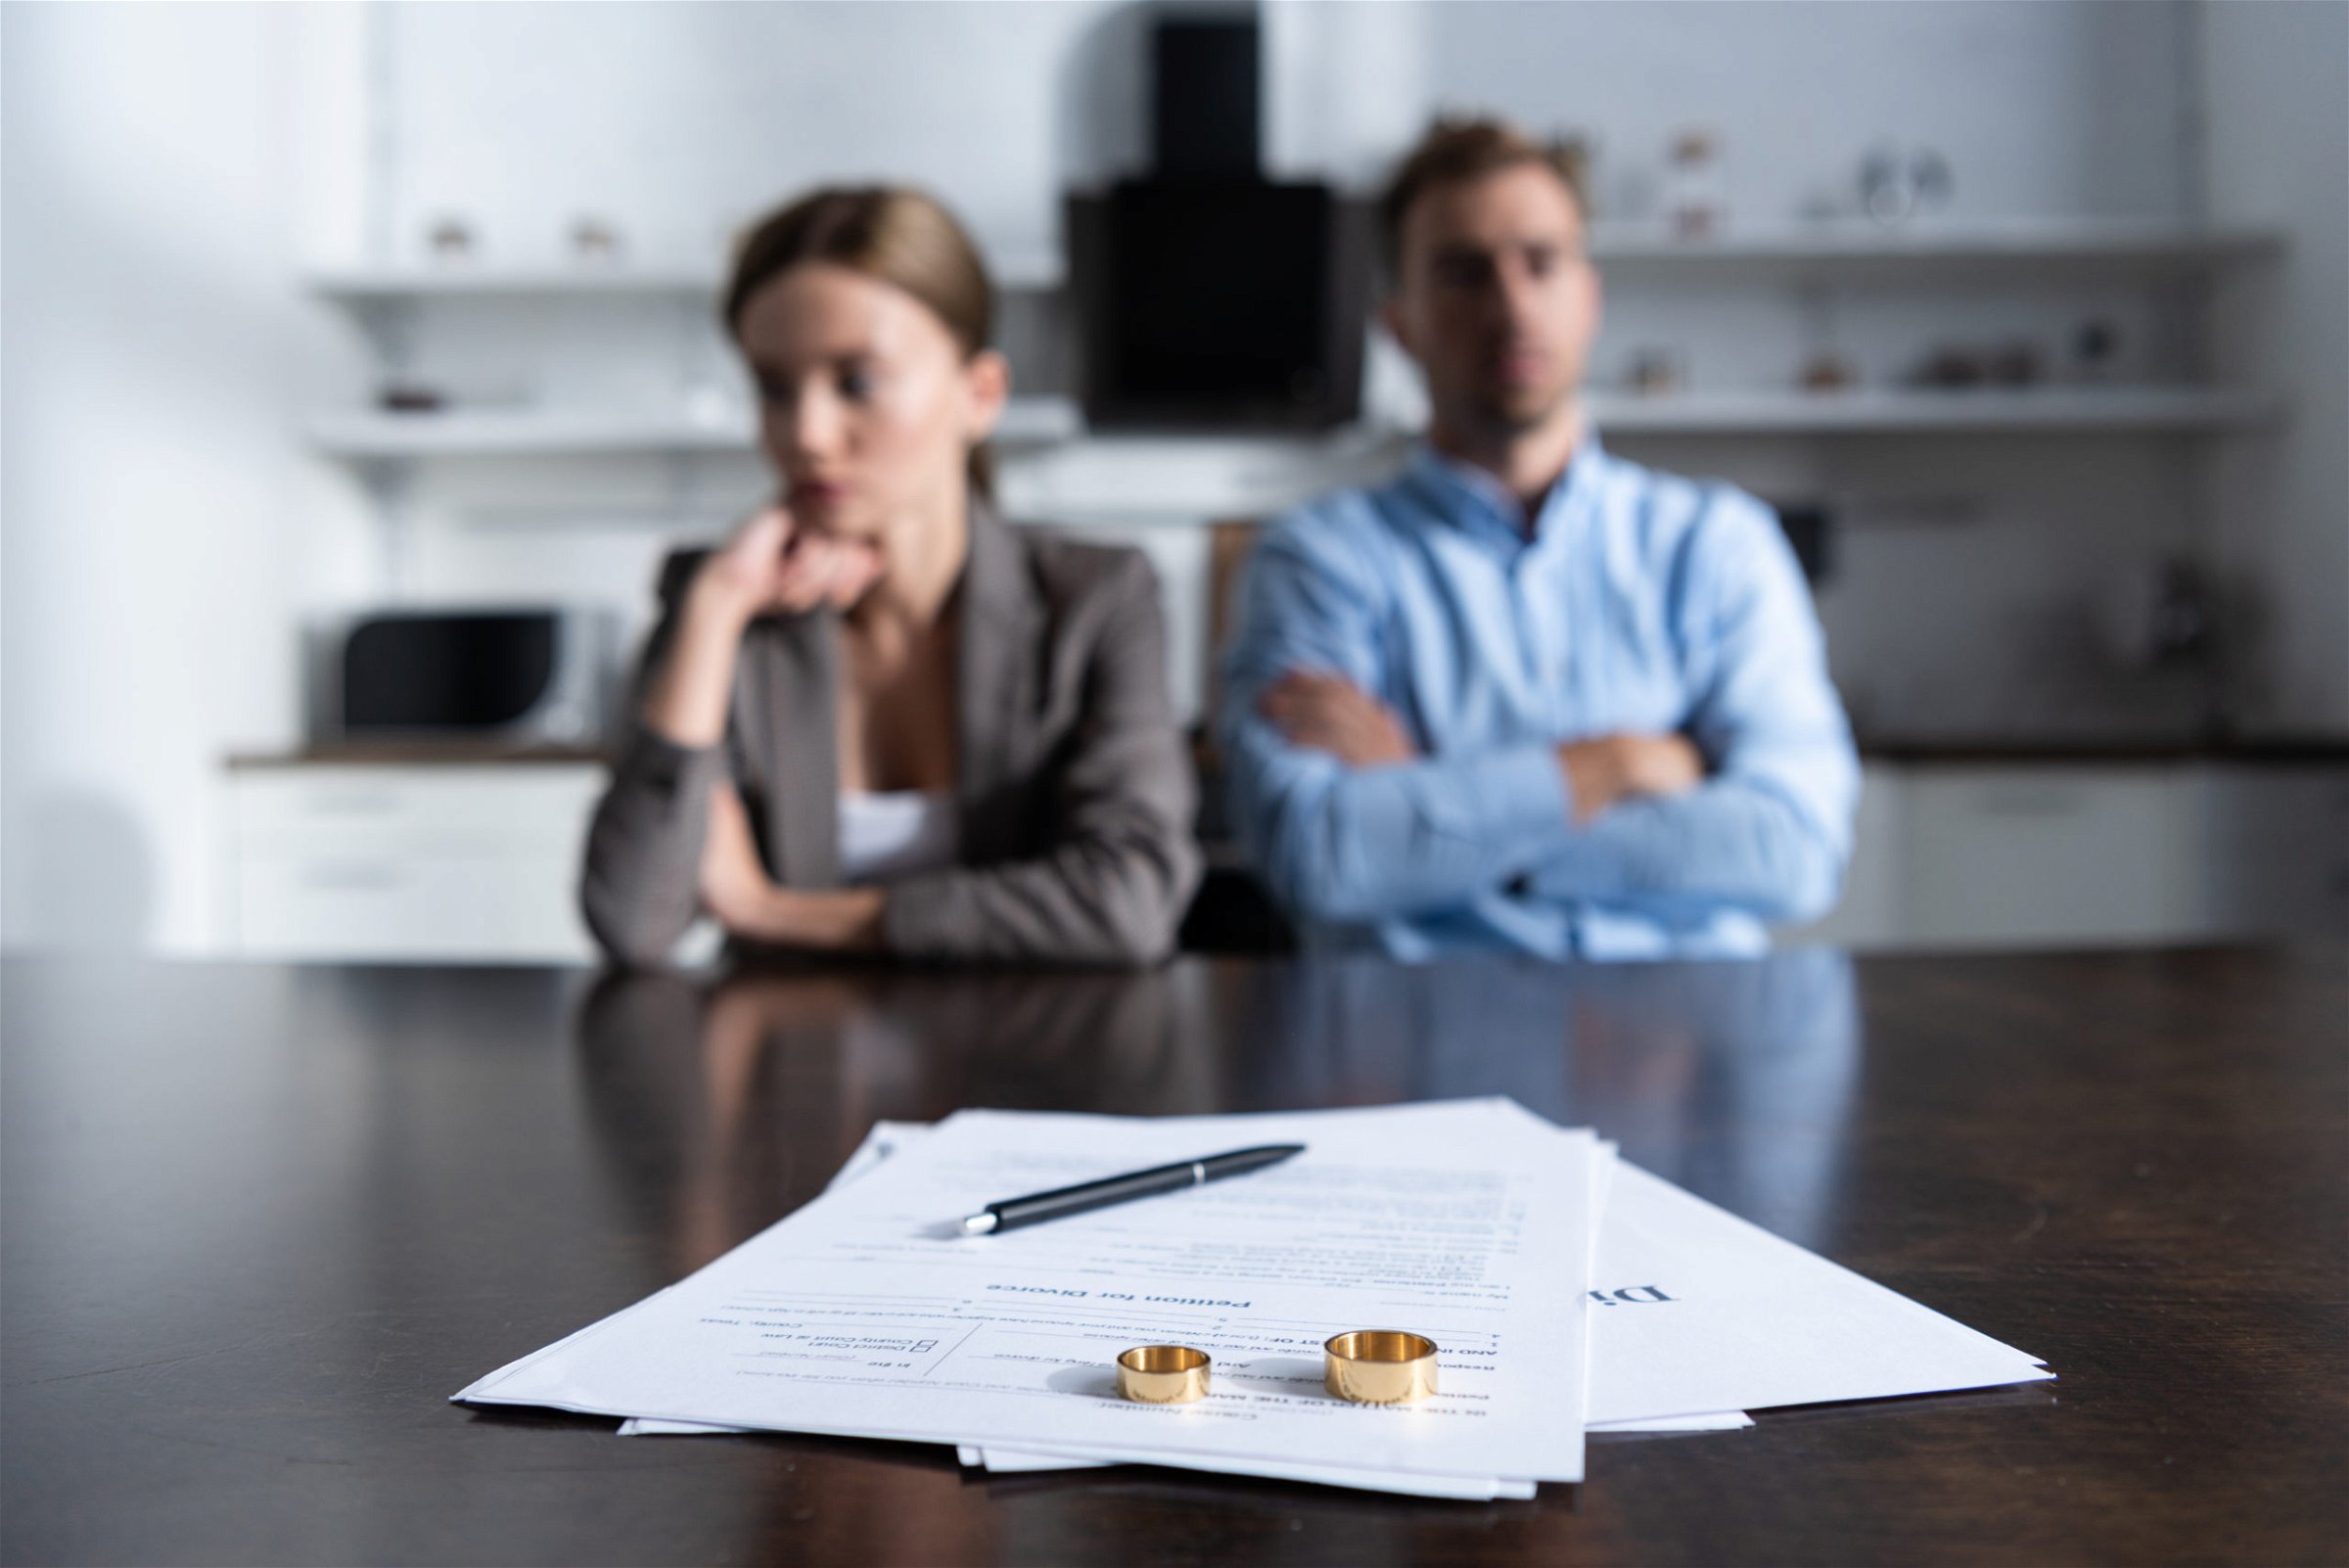 Whether you expected your spouse to file for divorce or the news came as a shock, one fact is clear: You’re now involved in a divorce proceeding. It’s important to speak to an experienced Austin divorce lawyer as soon as possible once you receive divorce paperwork. It’s also important to understand the basics of the situation when your spouse files for divorce.